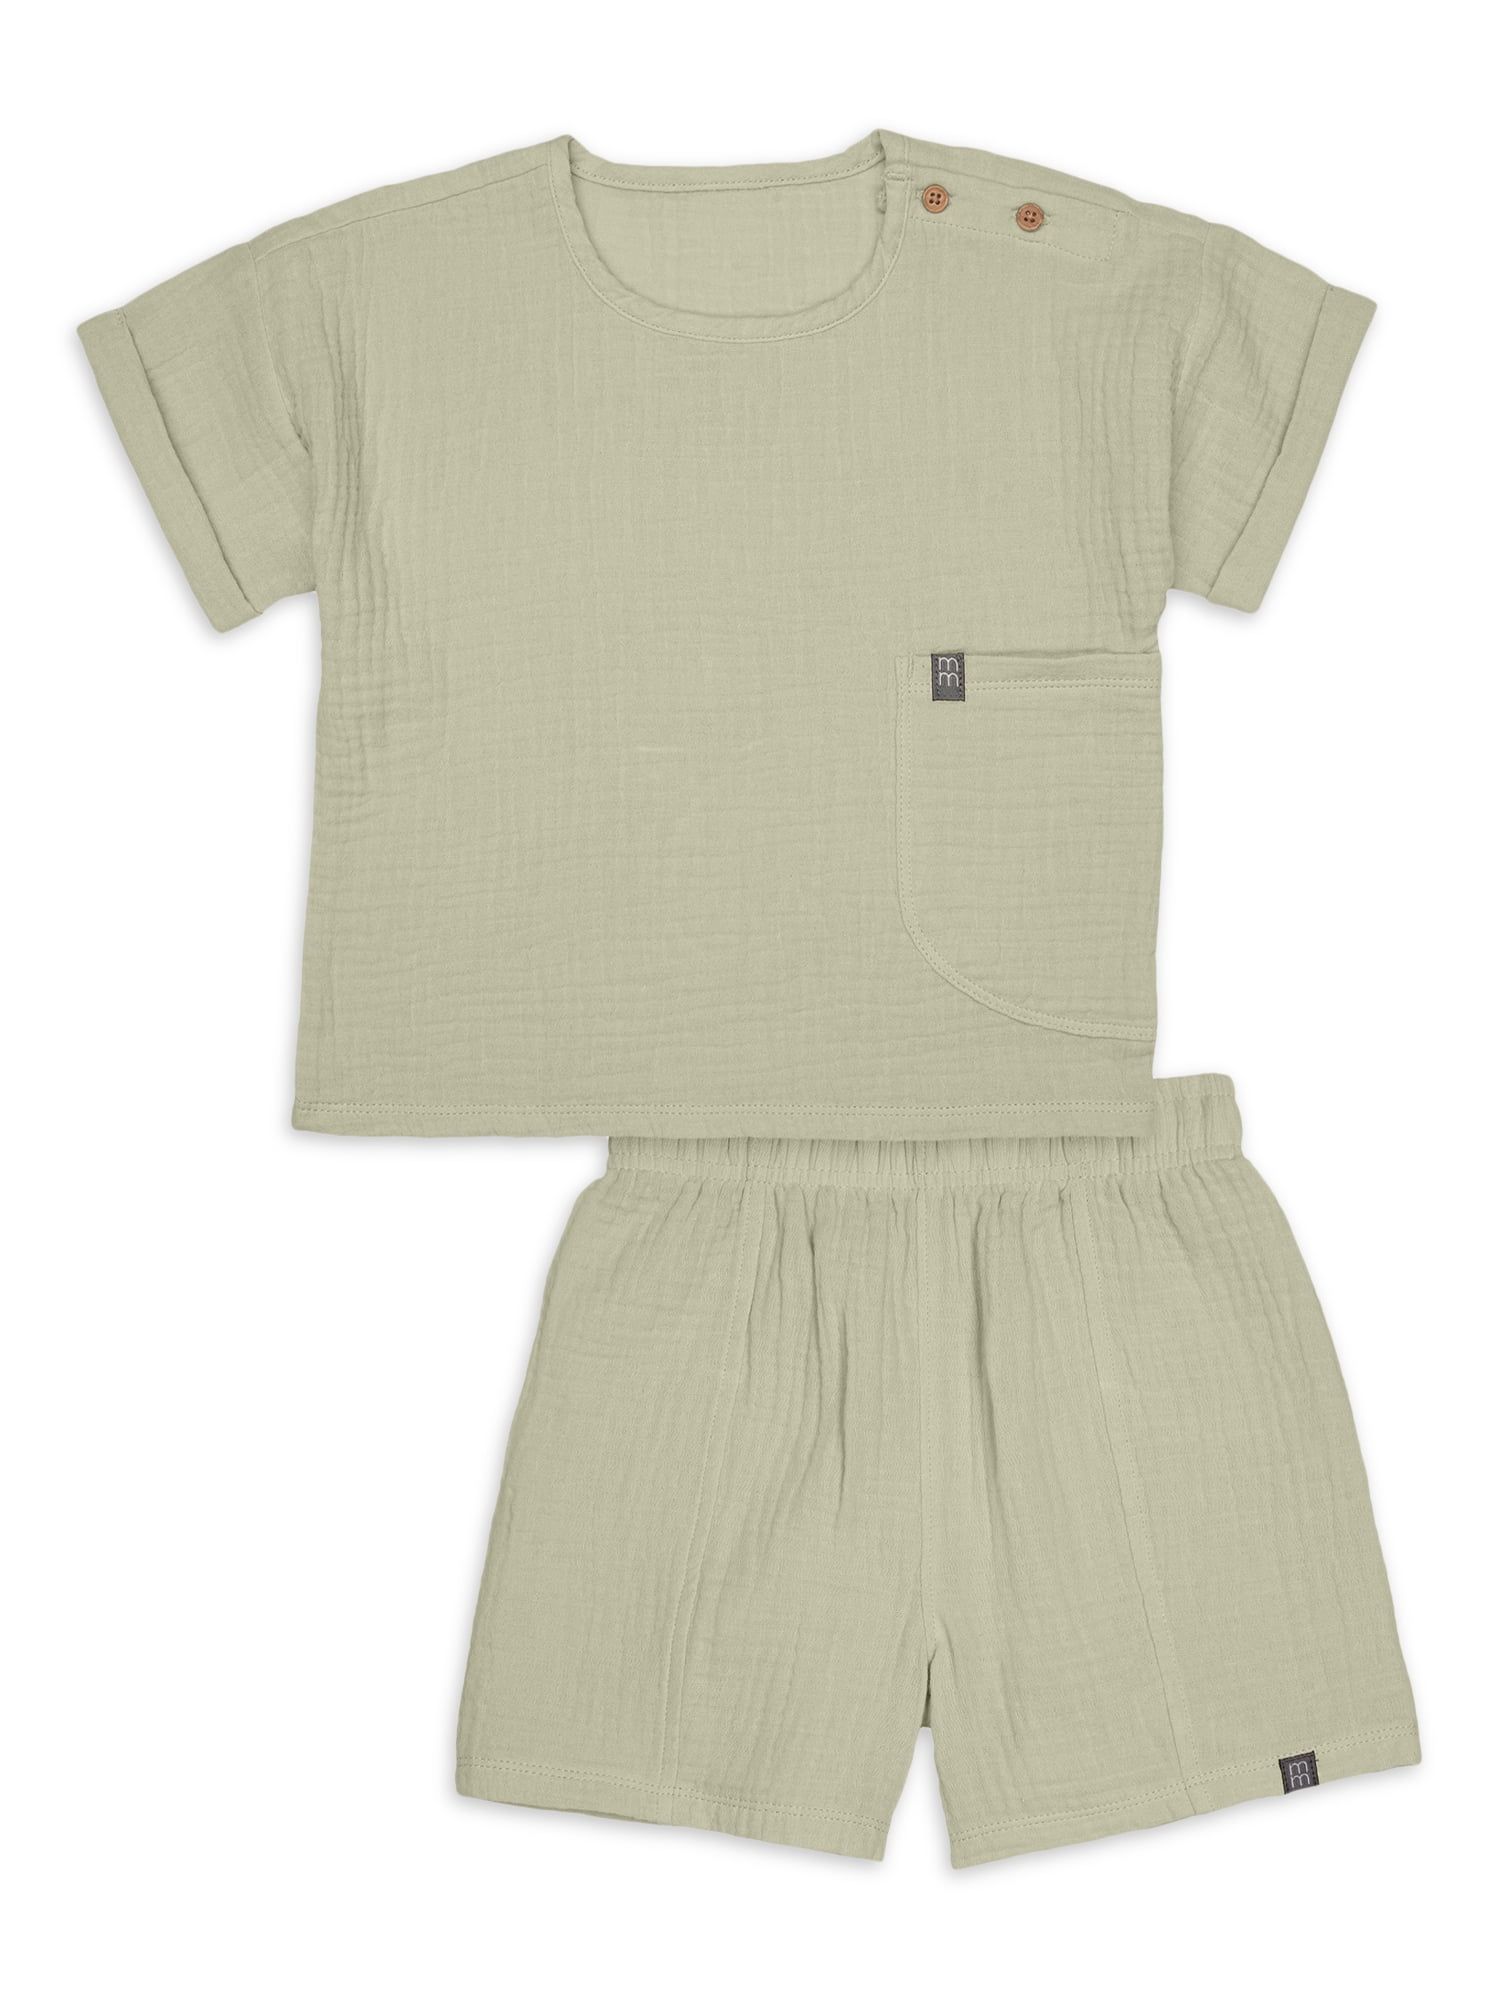 Modern Moments by Gerber Toddler Boy Casual Cotton Gauze Outfit Set, Sizes 12M-5T | Walmart (US)